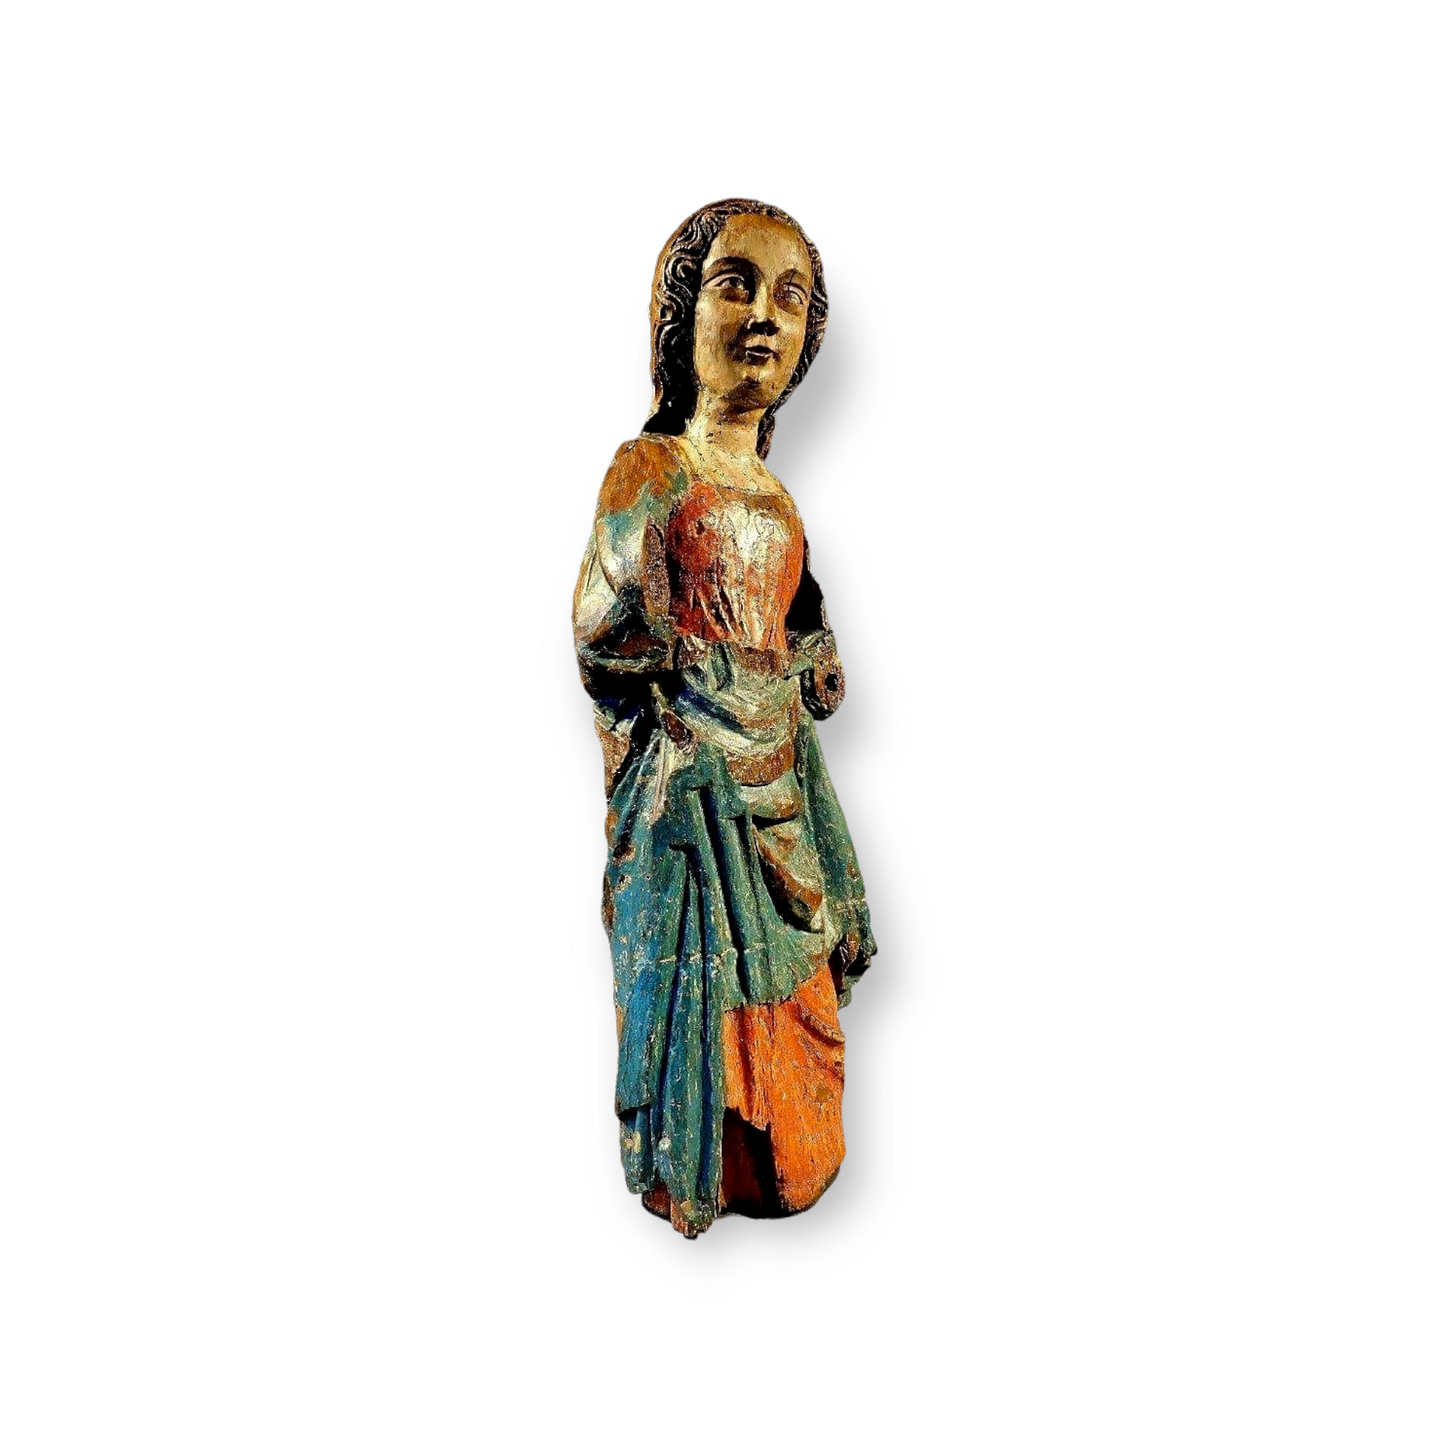 Late 15th Century German Antique Carved Oak Sculpture of a Female Saint, Possibly The Virgin Mary